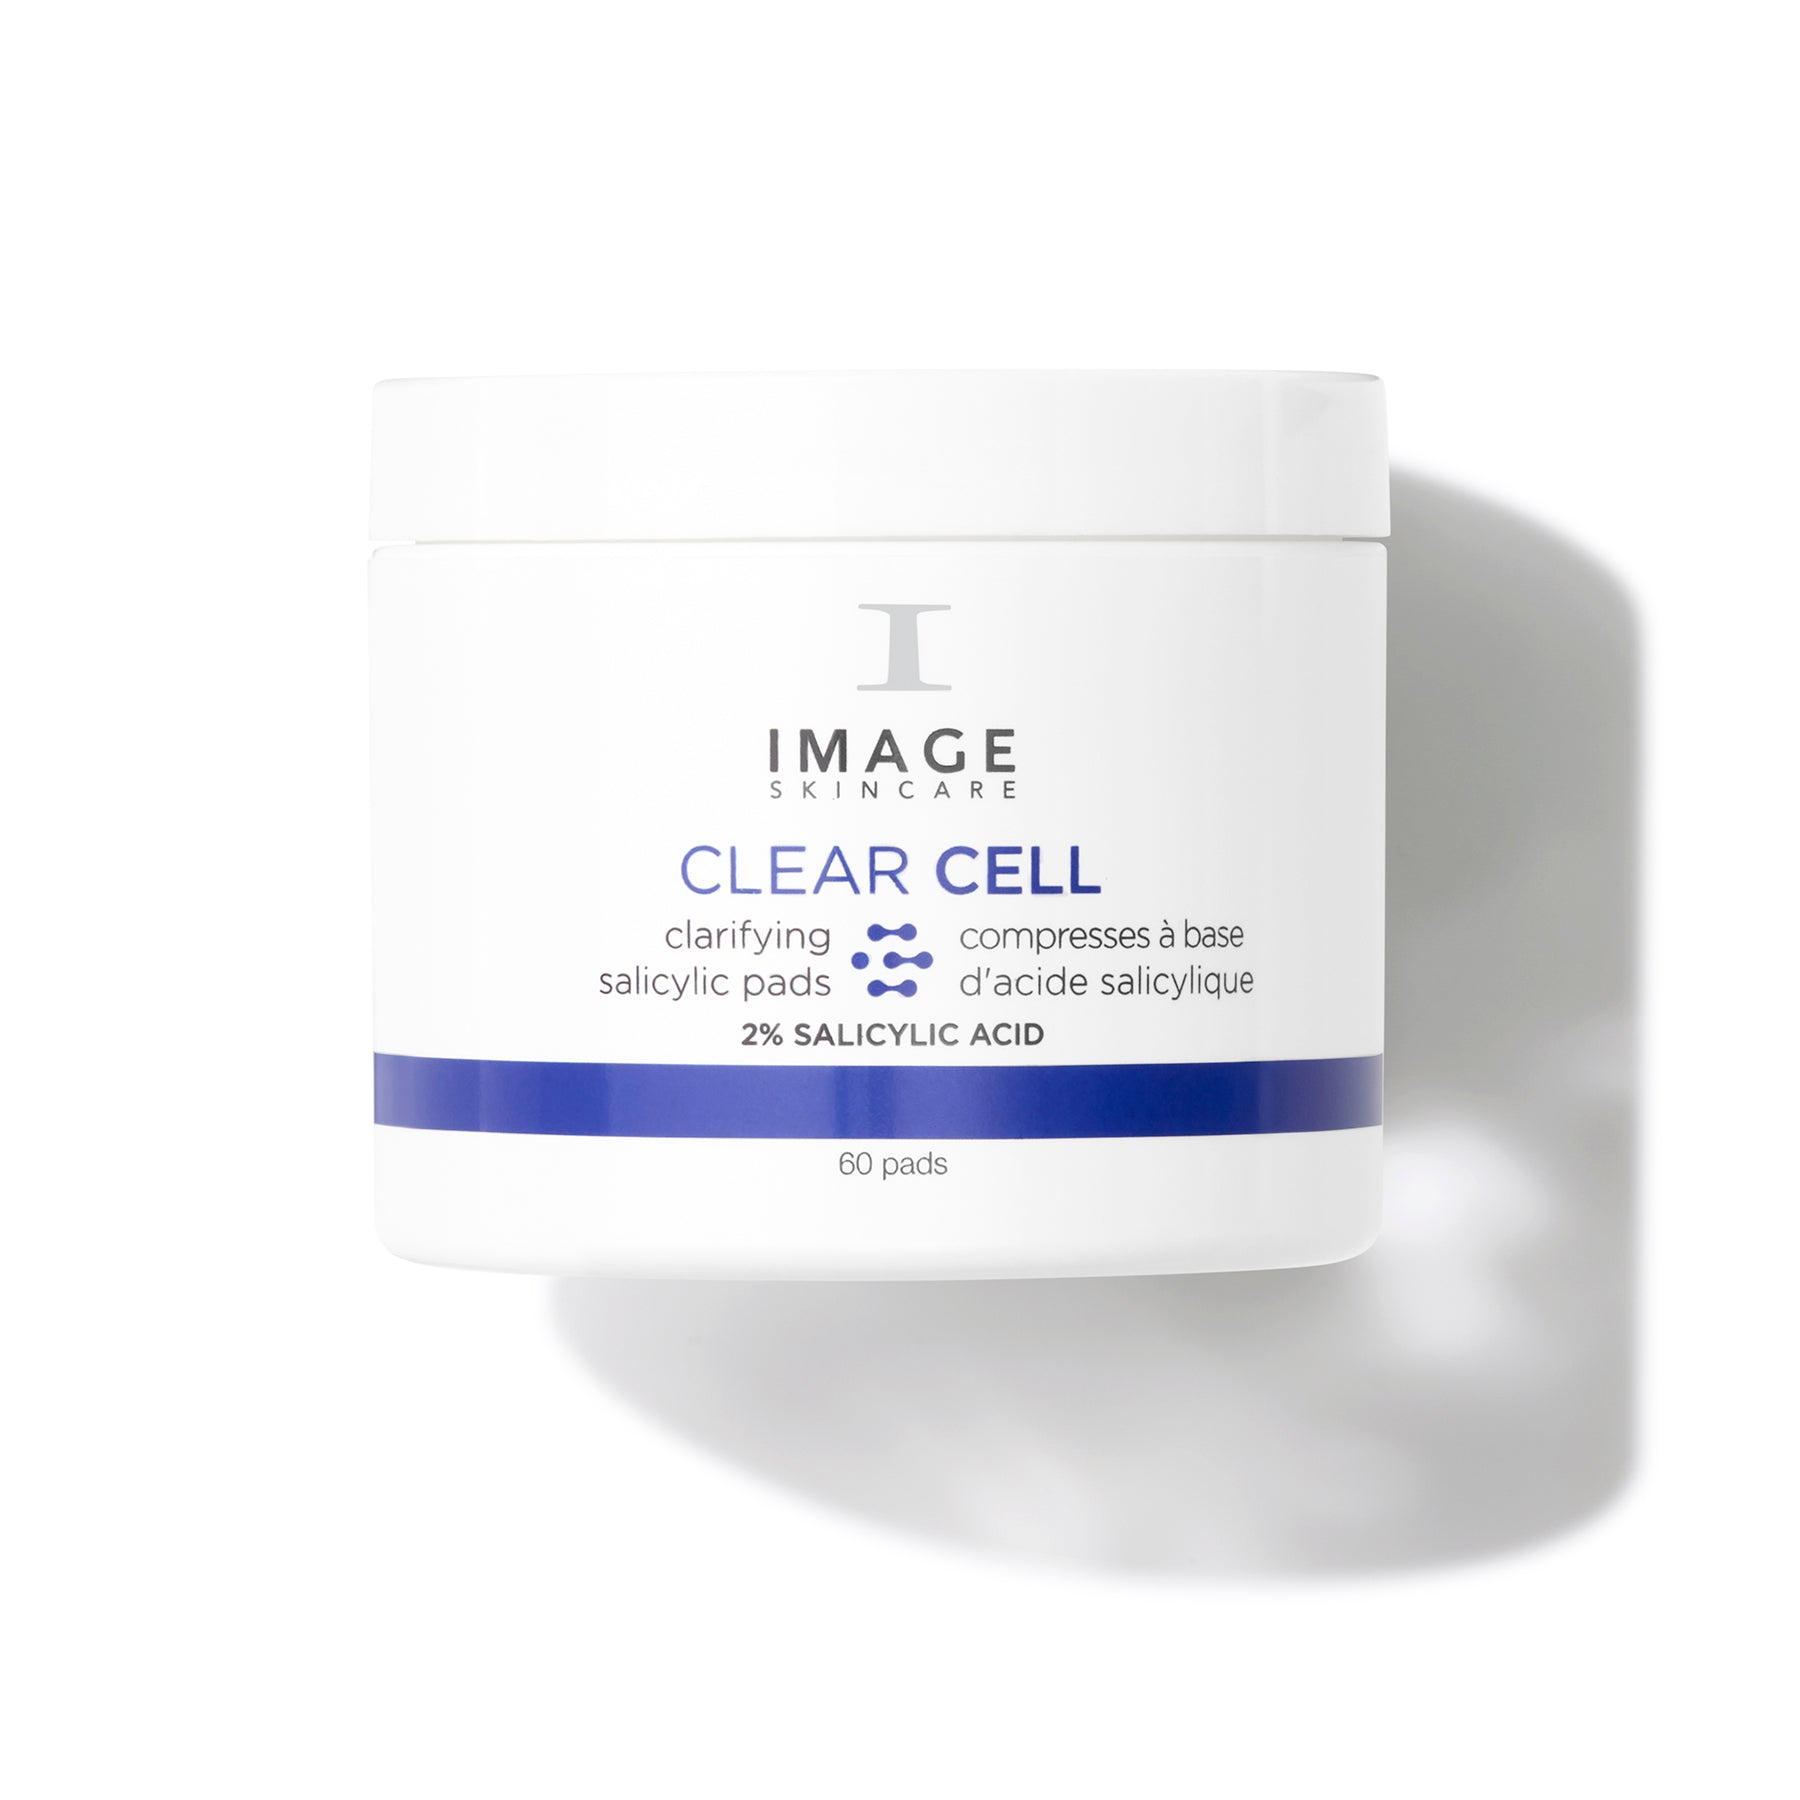 Glycolic acid Pads artfact. Max Clear image Skincare. Neogen PORERASER Clear BHA Pad.